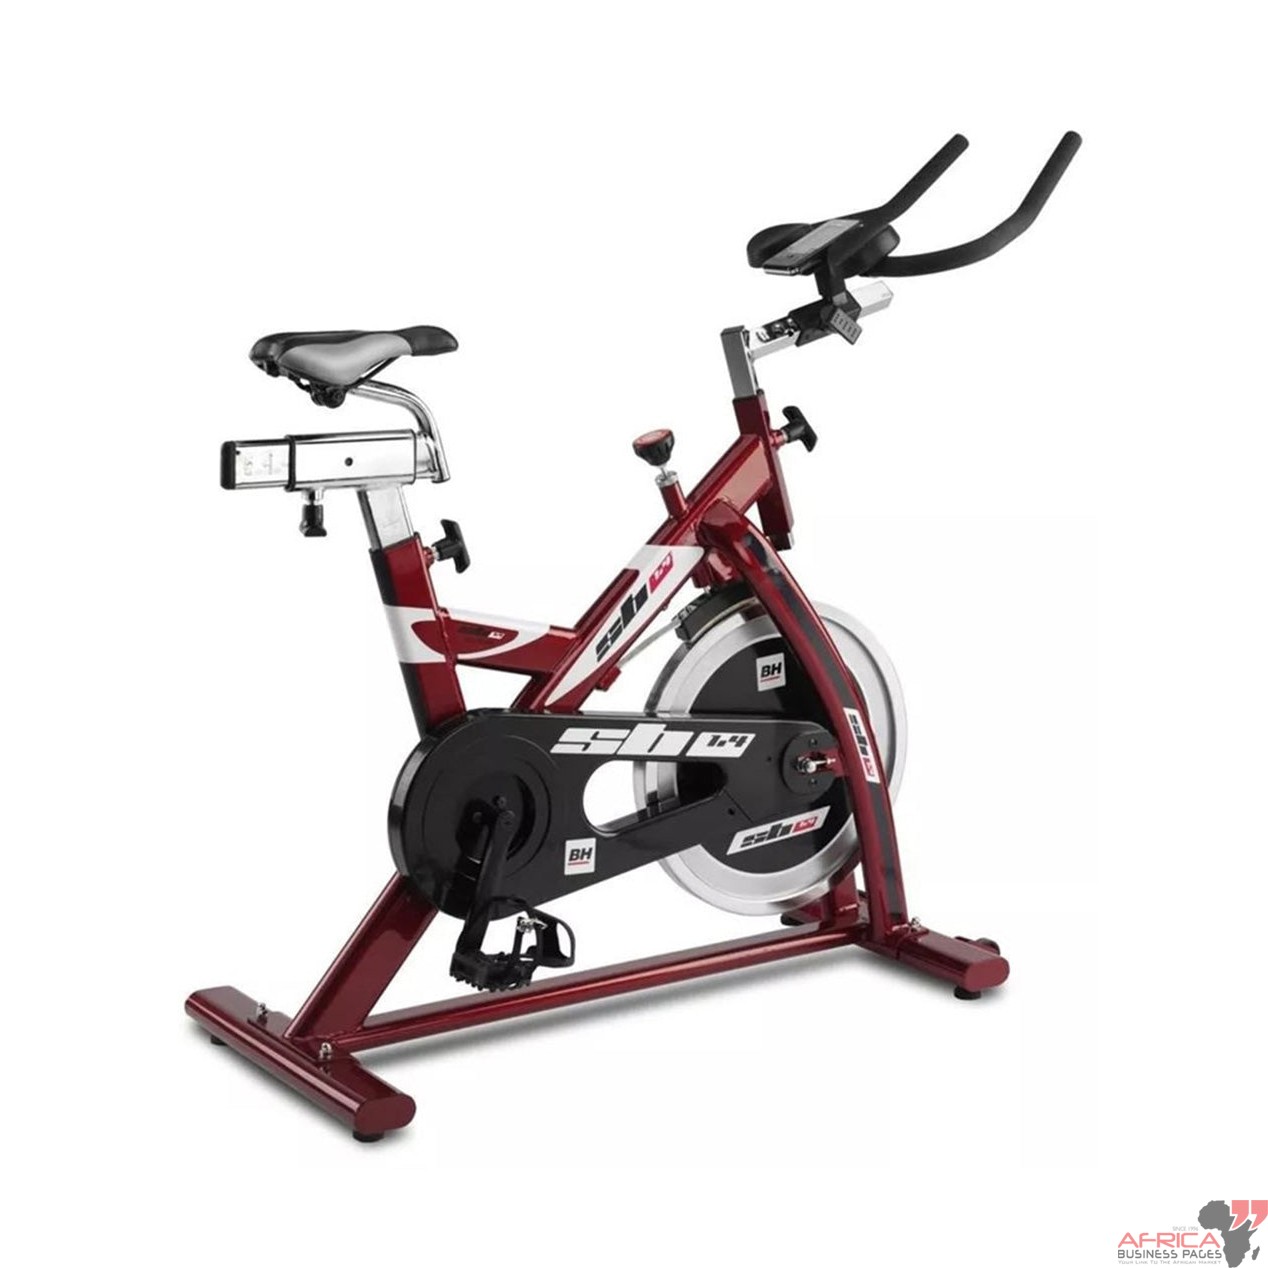 pro-sports-bh-fitness-sb-1-4-indoor-spin-bike